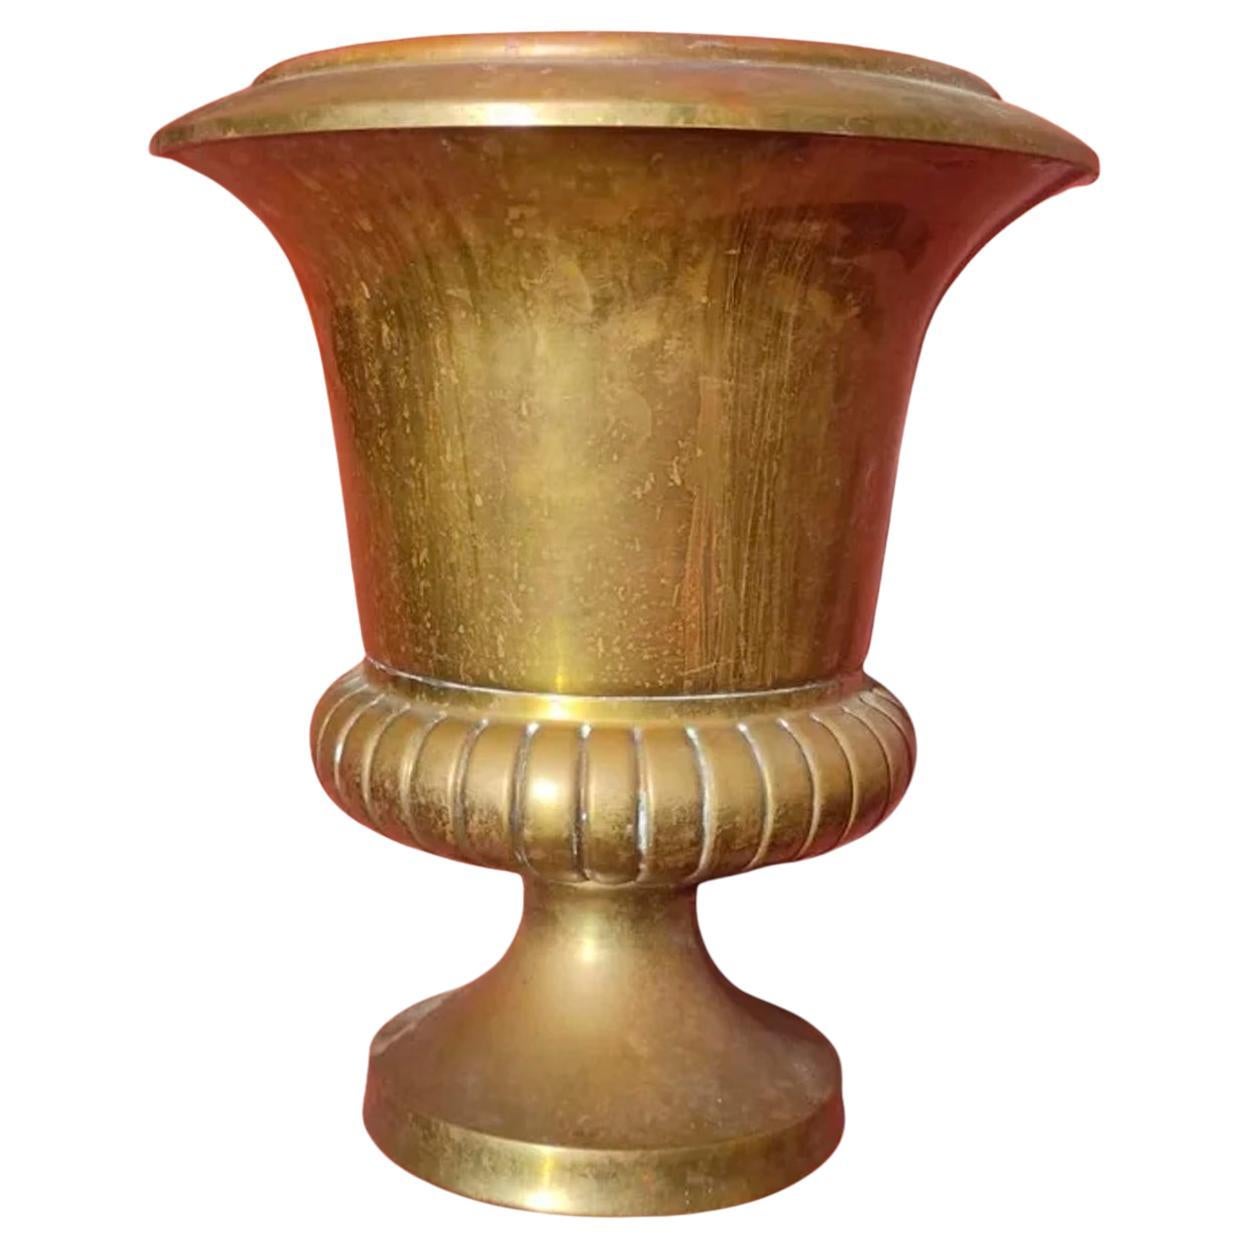 Classic Brass Cup Planter Vase or Jardiniere Early 20th Century